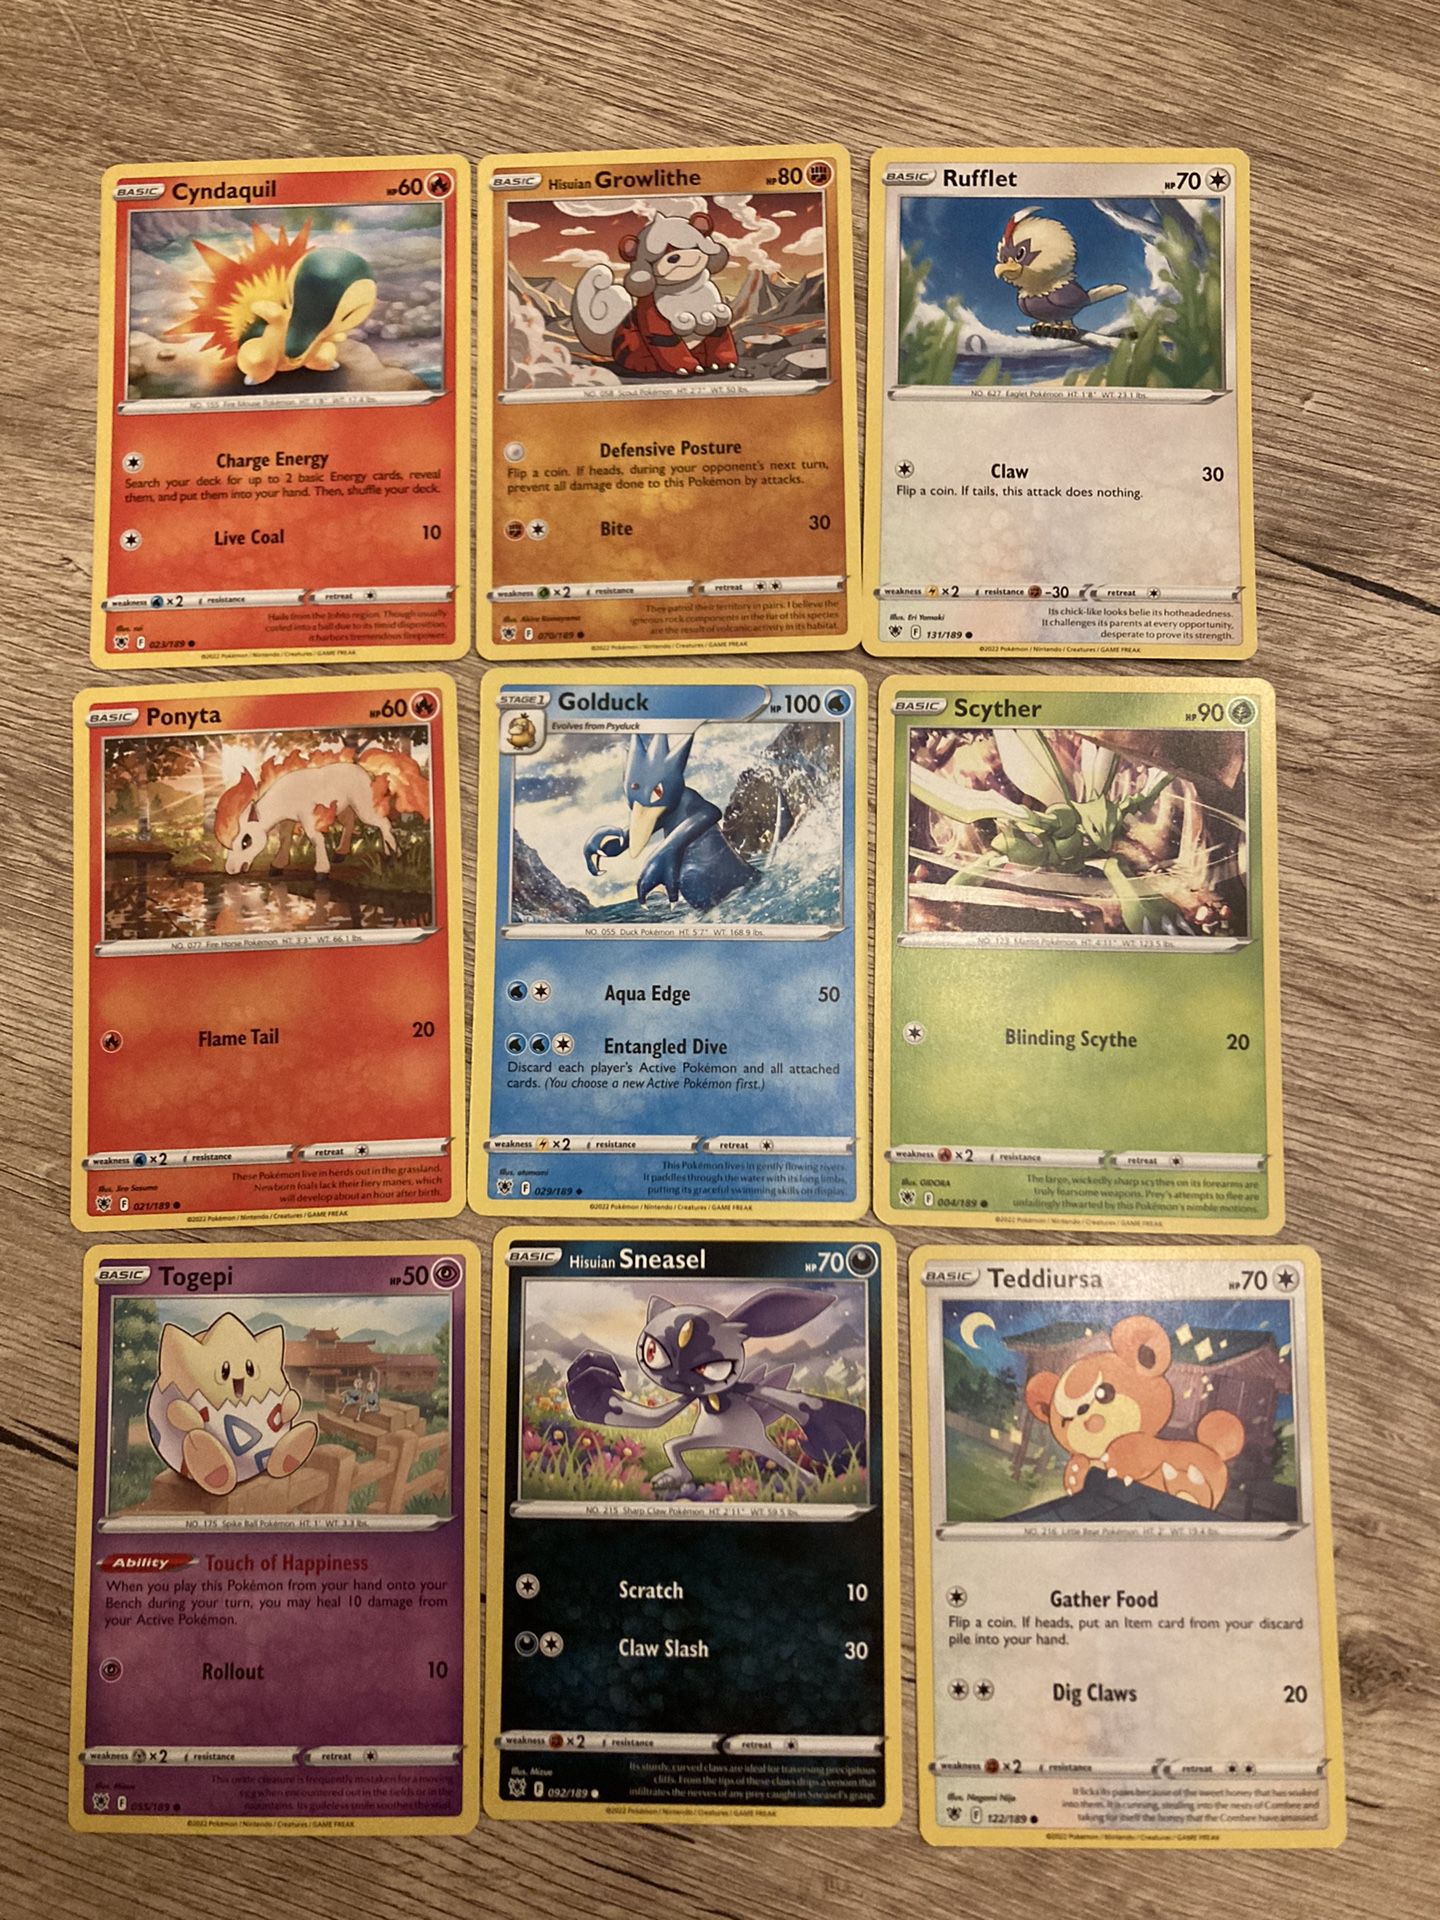 750 Pokémon Cards (no trainers or energy)